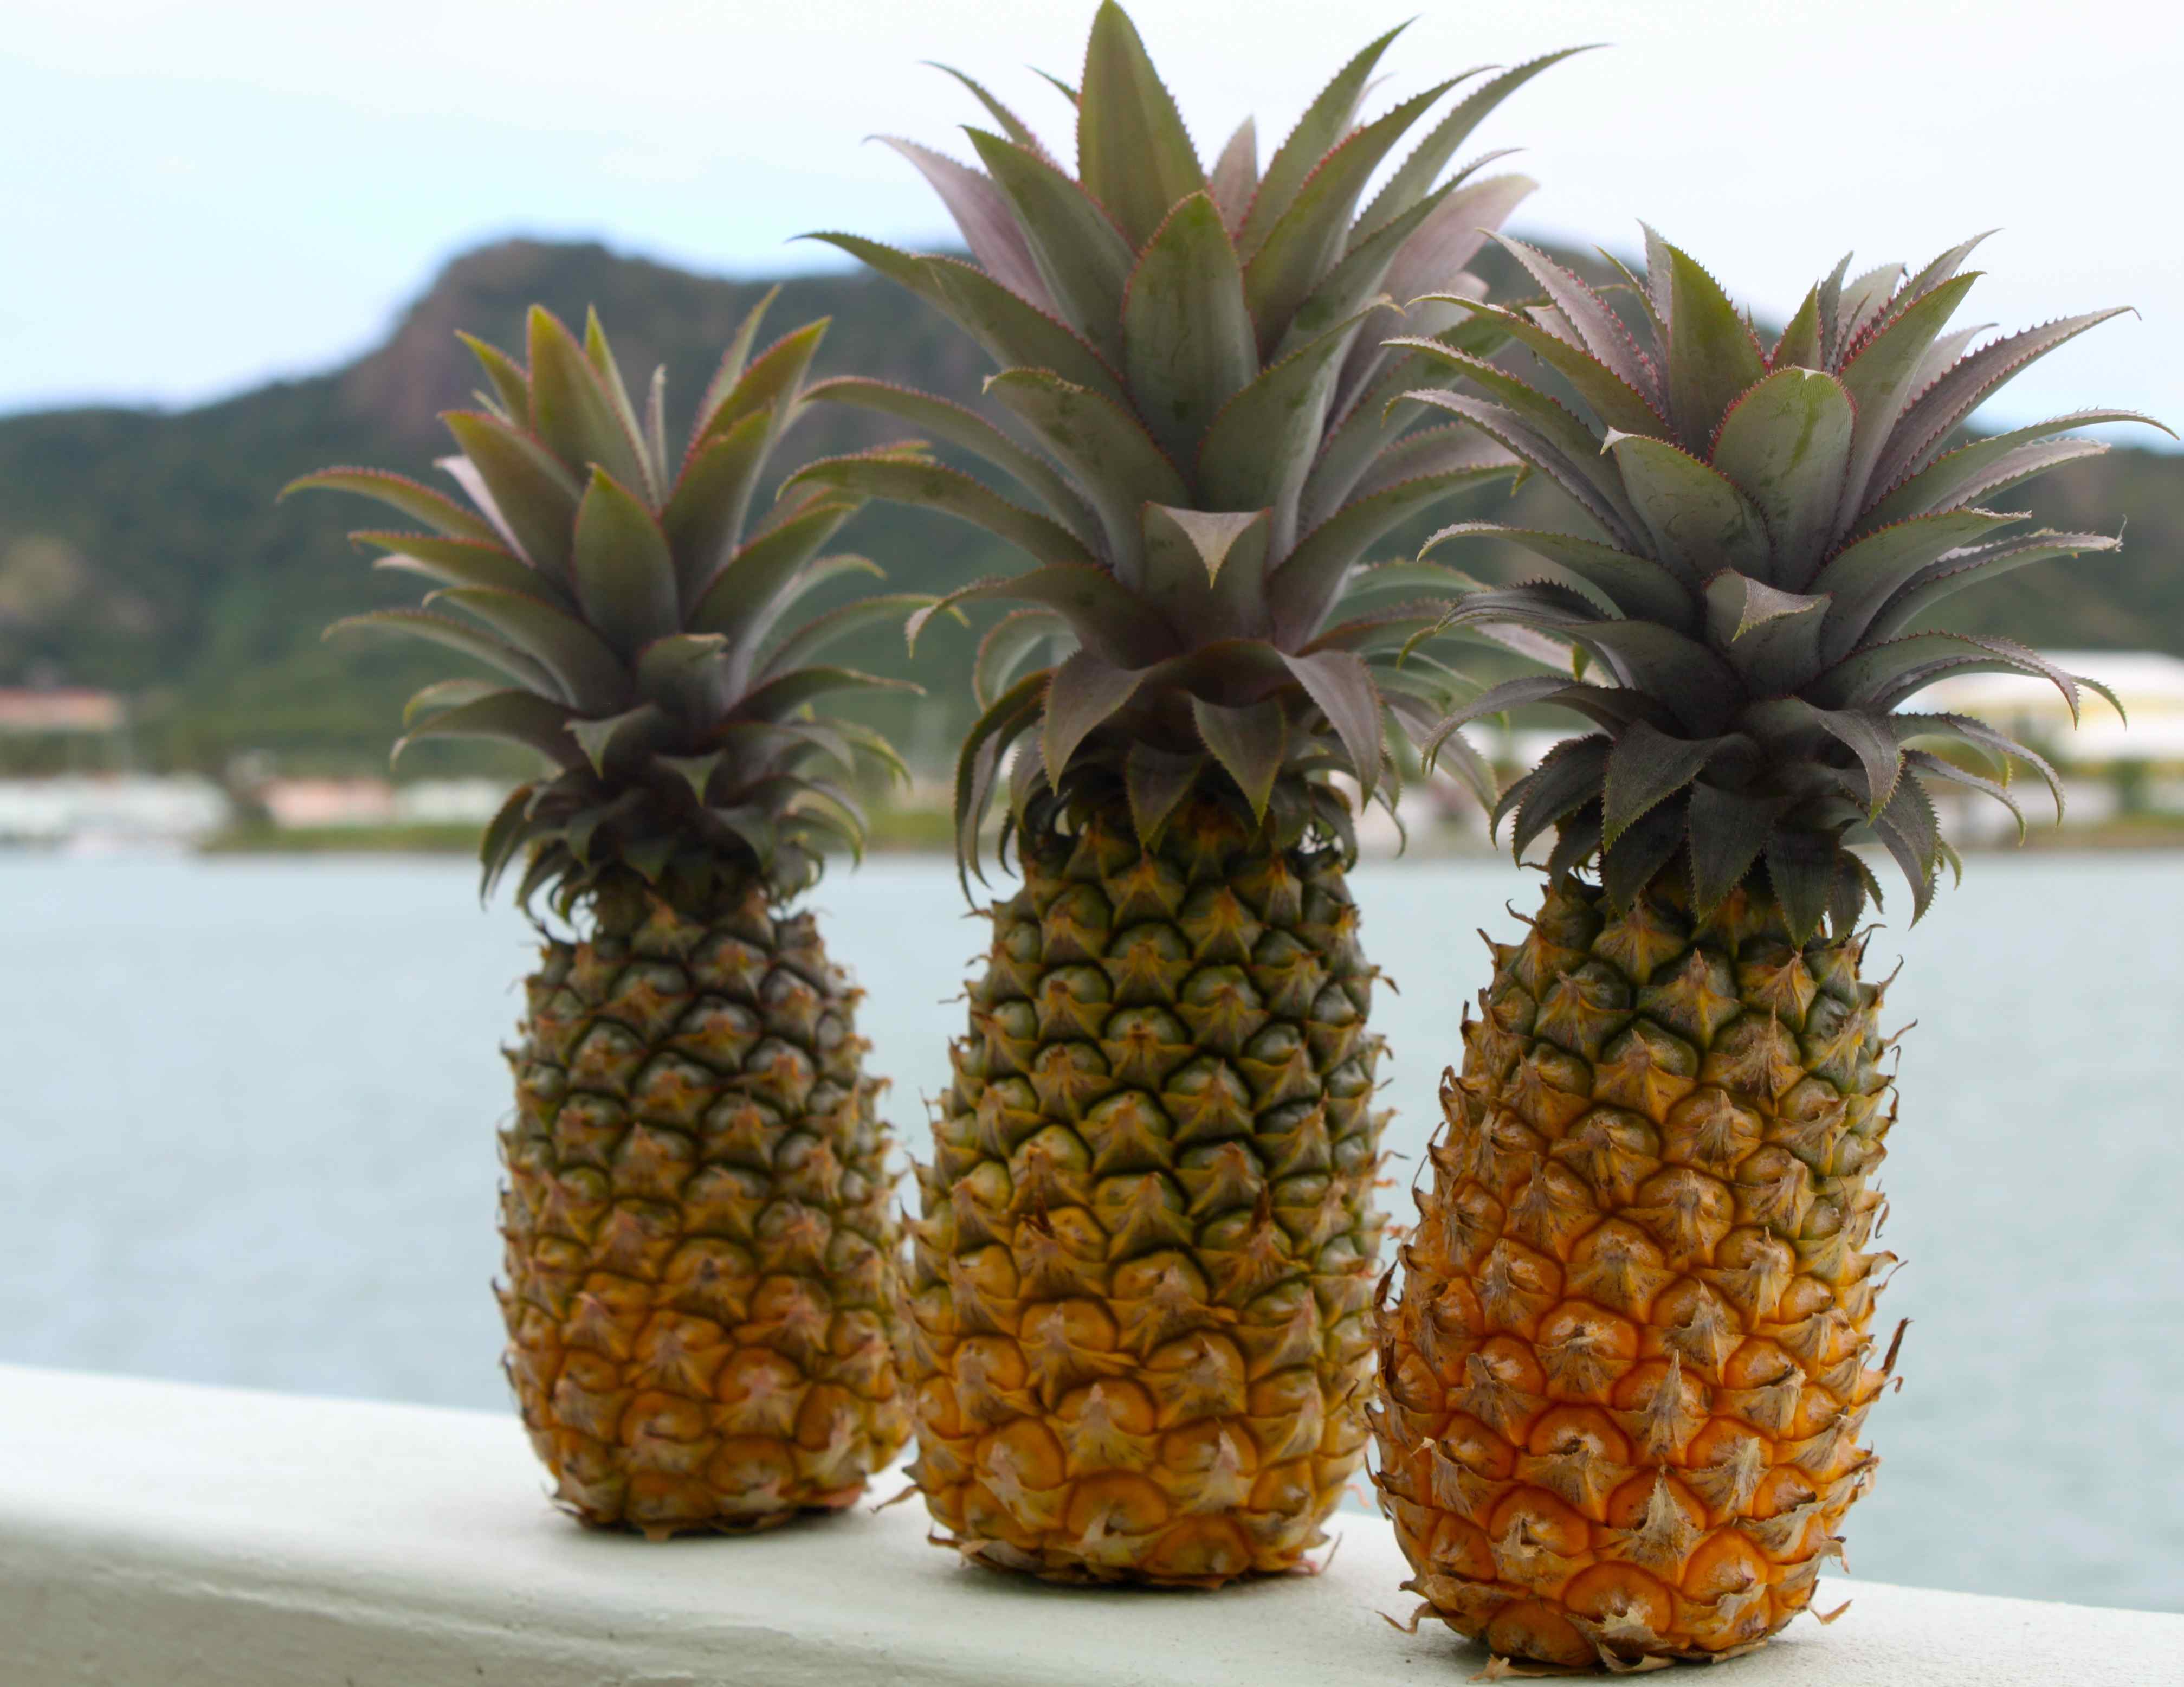 Provides Awesome Collection Of Pineapple Desktop Wallpaper